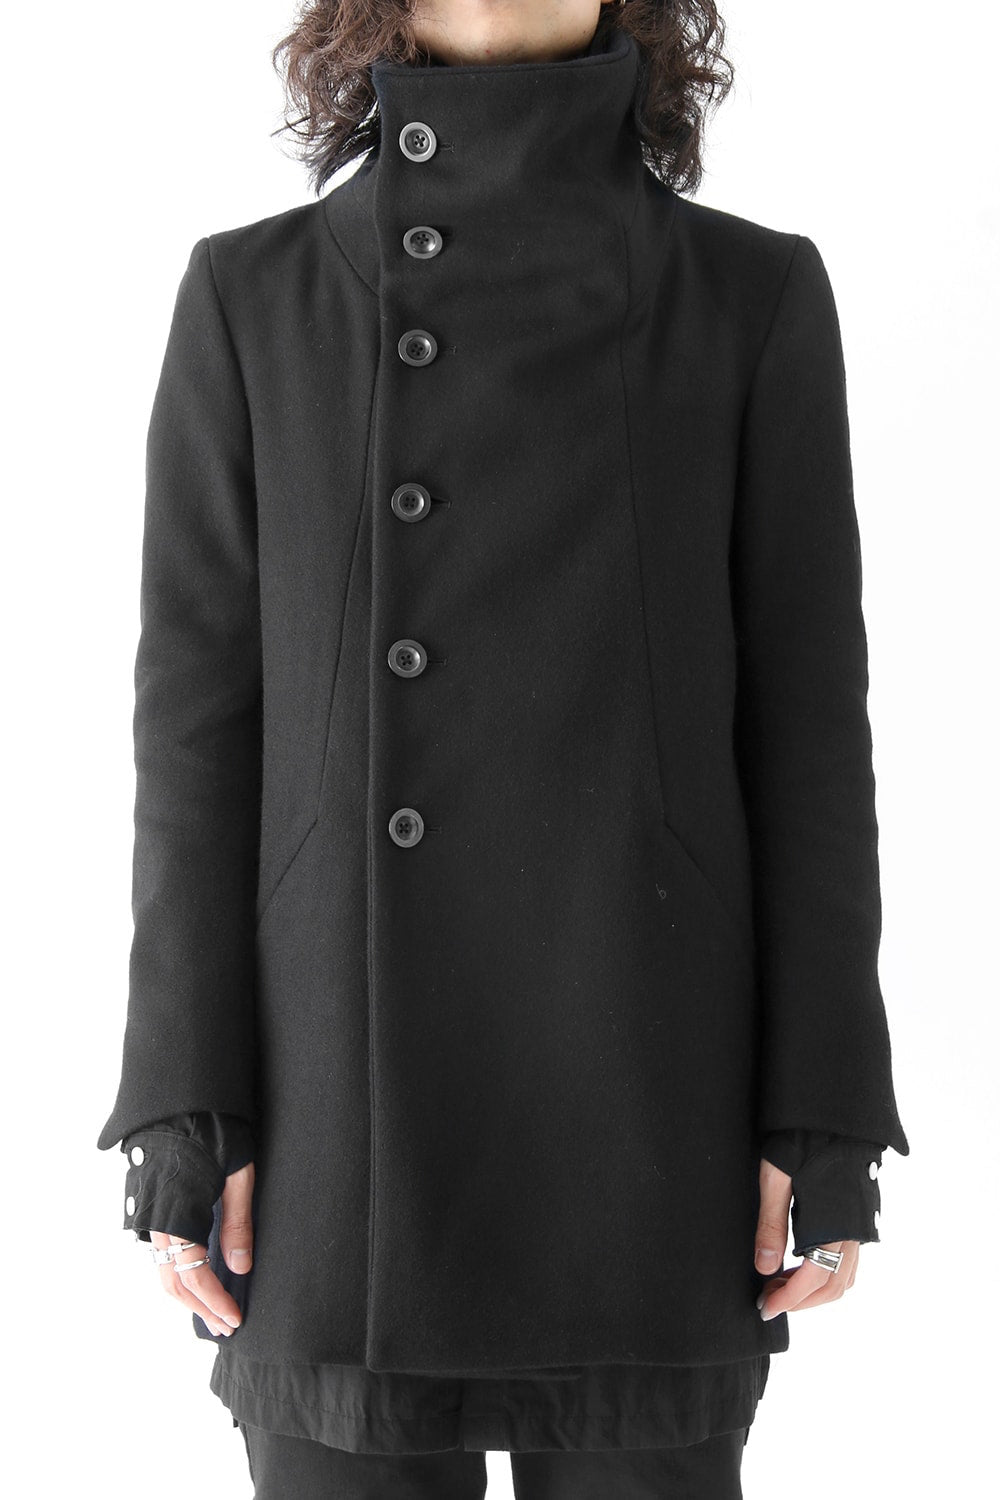 The Viridi-anne - High Neck Coat - Online Store - FASCINATE THE R 